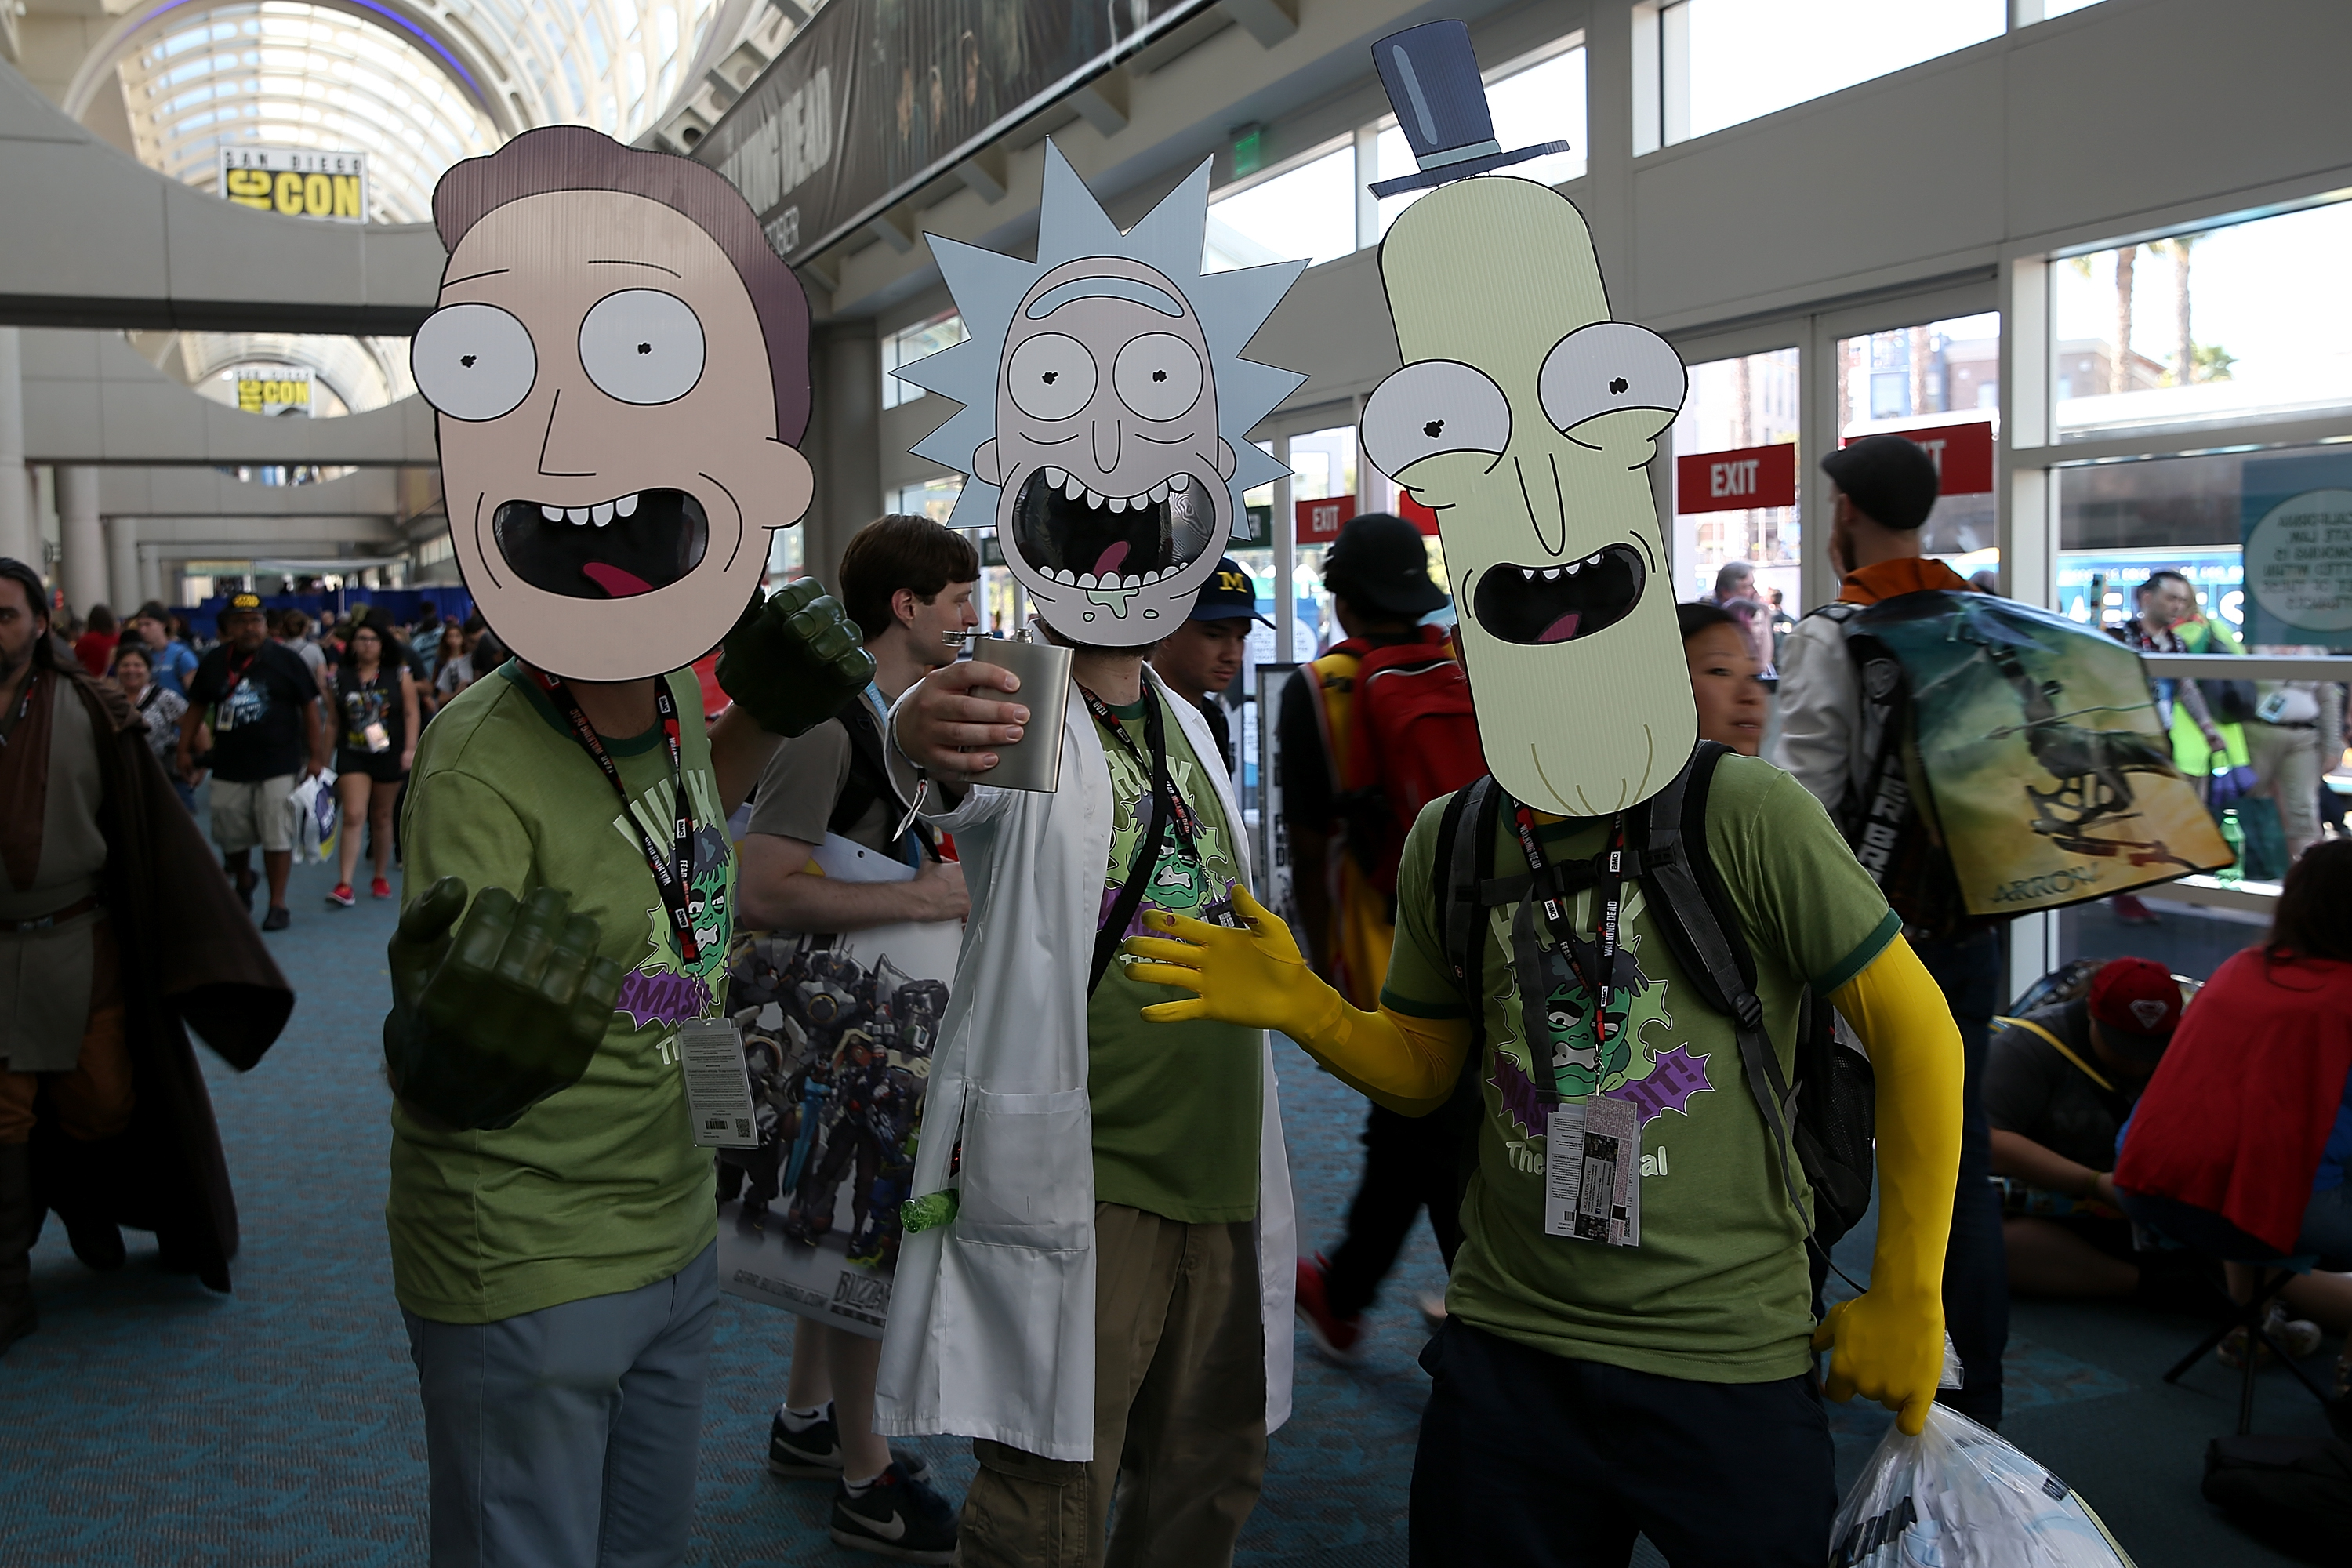 Fans with "Rick and Morty" masks attend Comic-Con International 2016 in San Diego. (Getty Images—2016 Phillip Faraone)